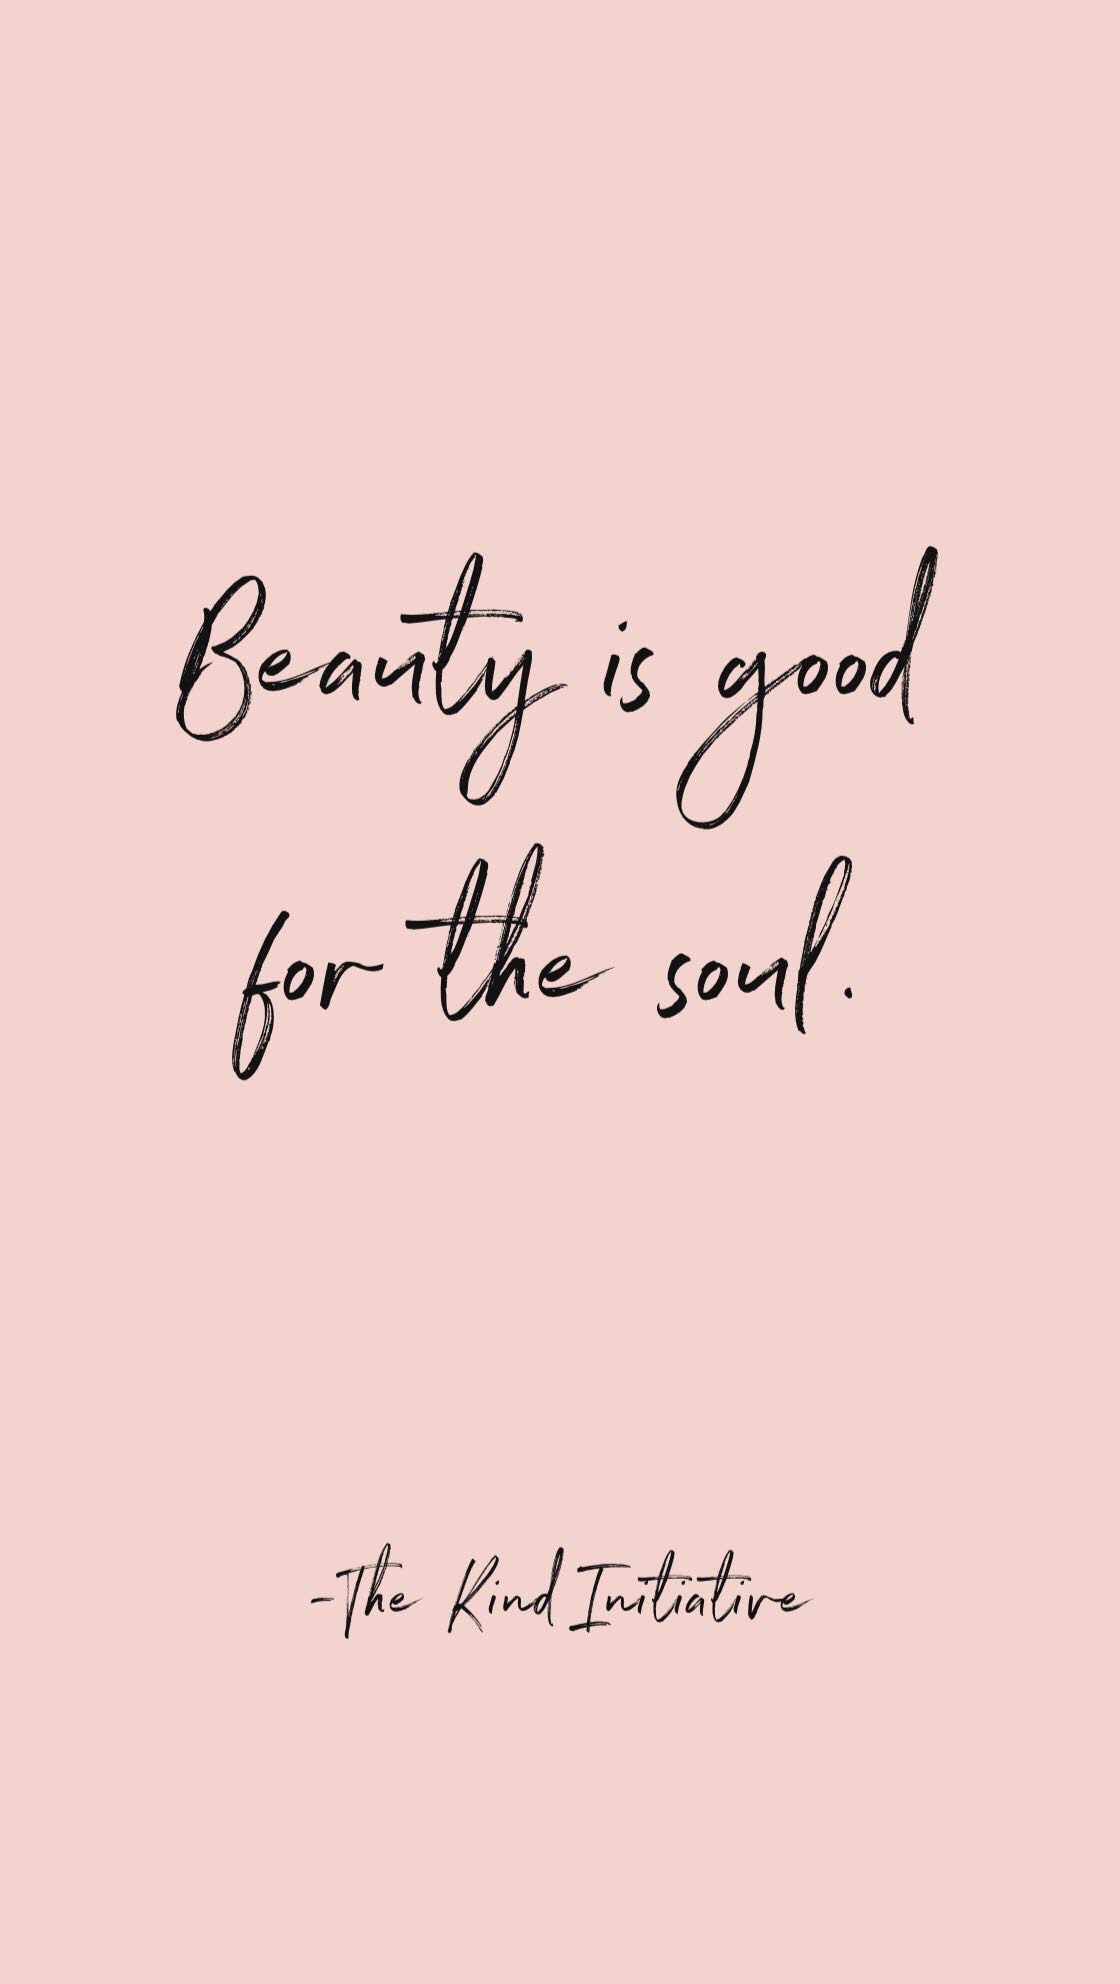 Beauty is good for the soul. - Beauty is good for the soul. -   9 natural beauty Quotes ideas